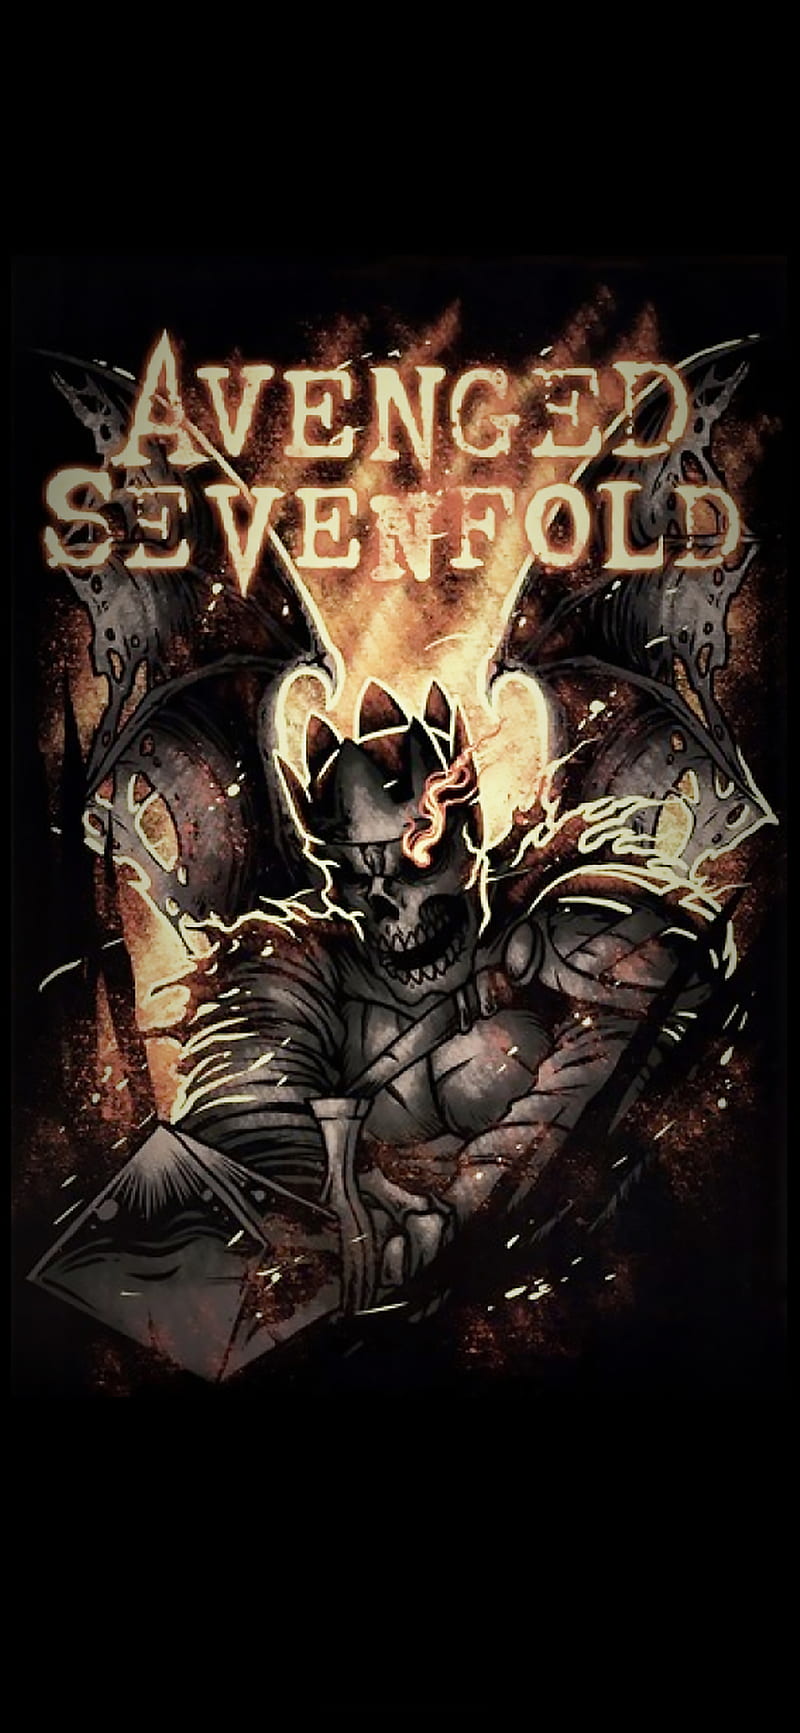 avenged sevenfold, a7x, hail to the king, mobile background, HD phone wallpaper